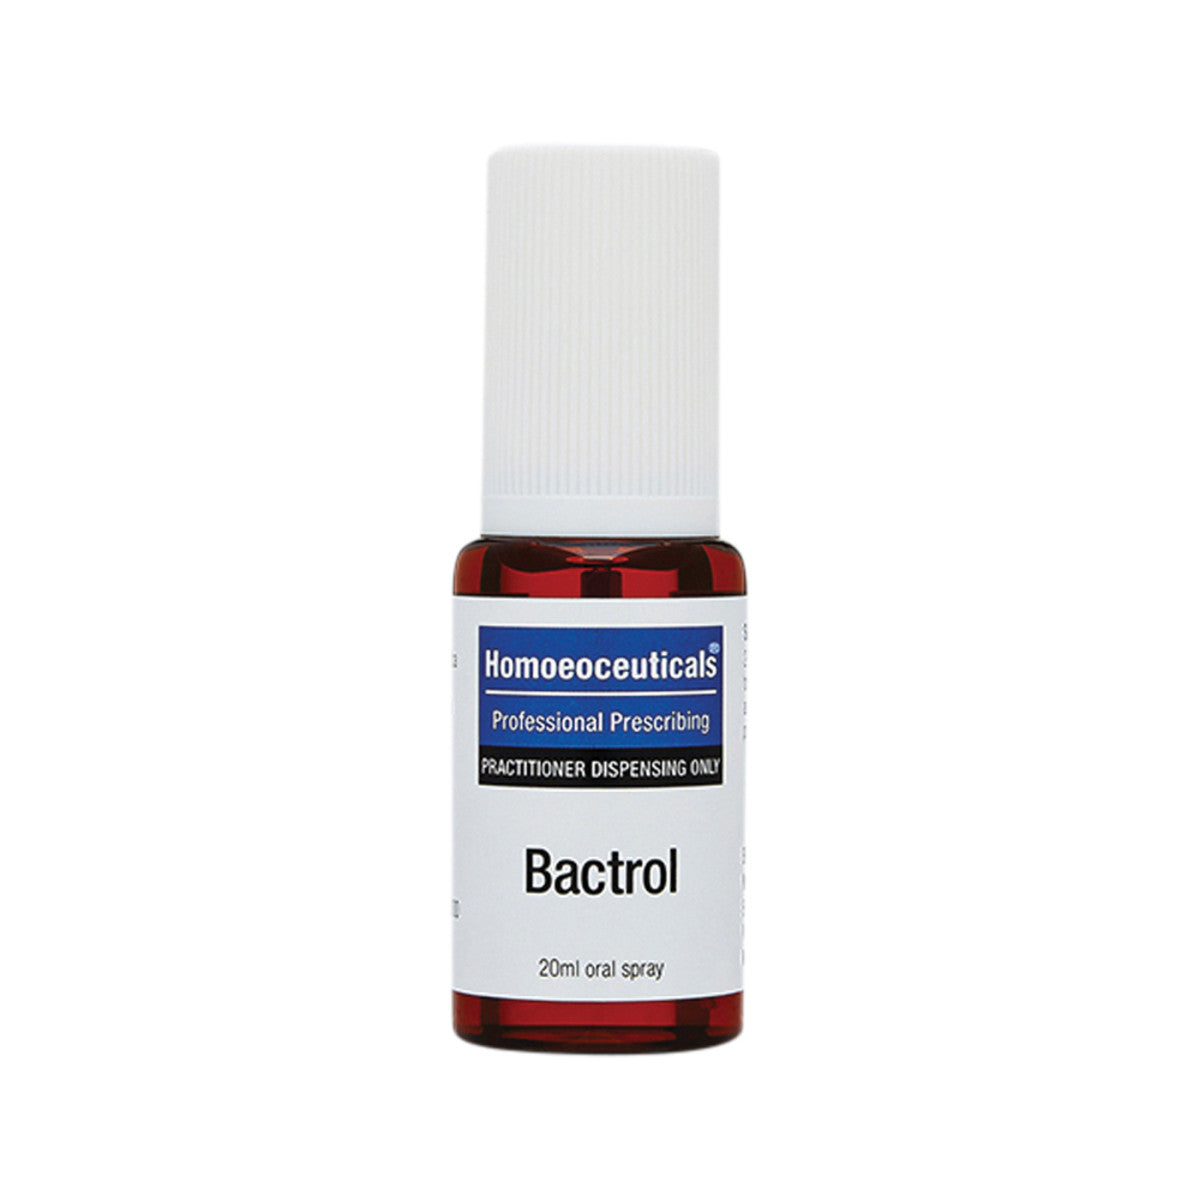 Homoeoceuticals - Bactrol Spray